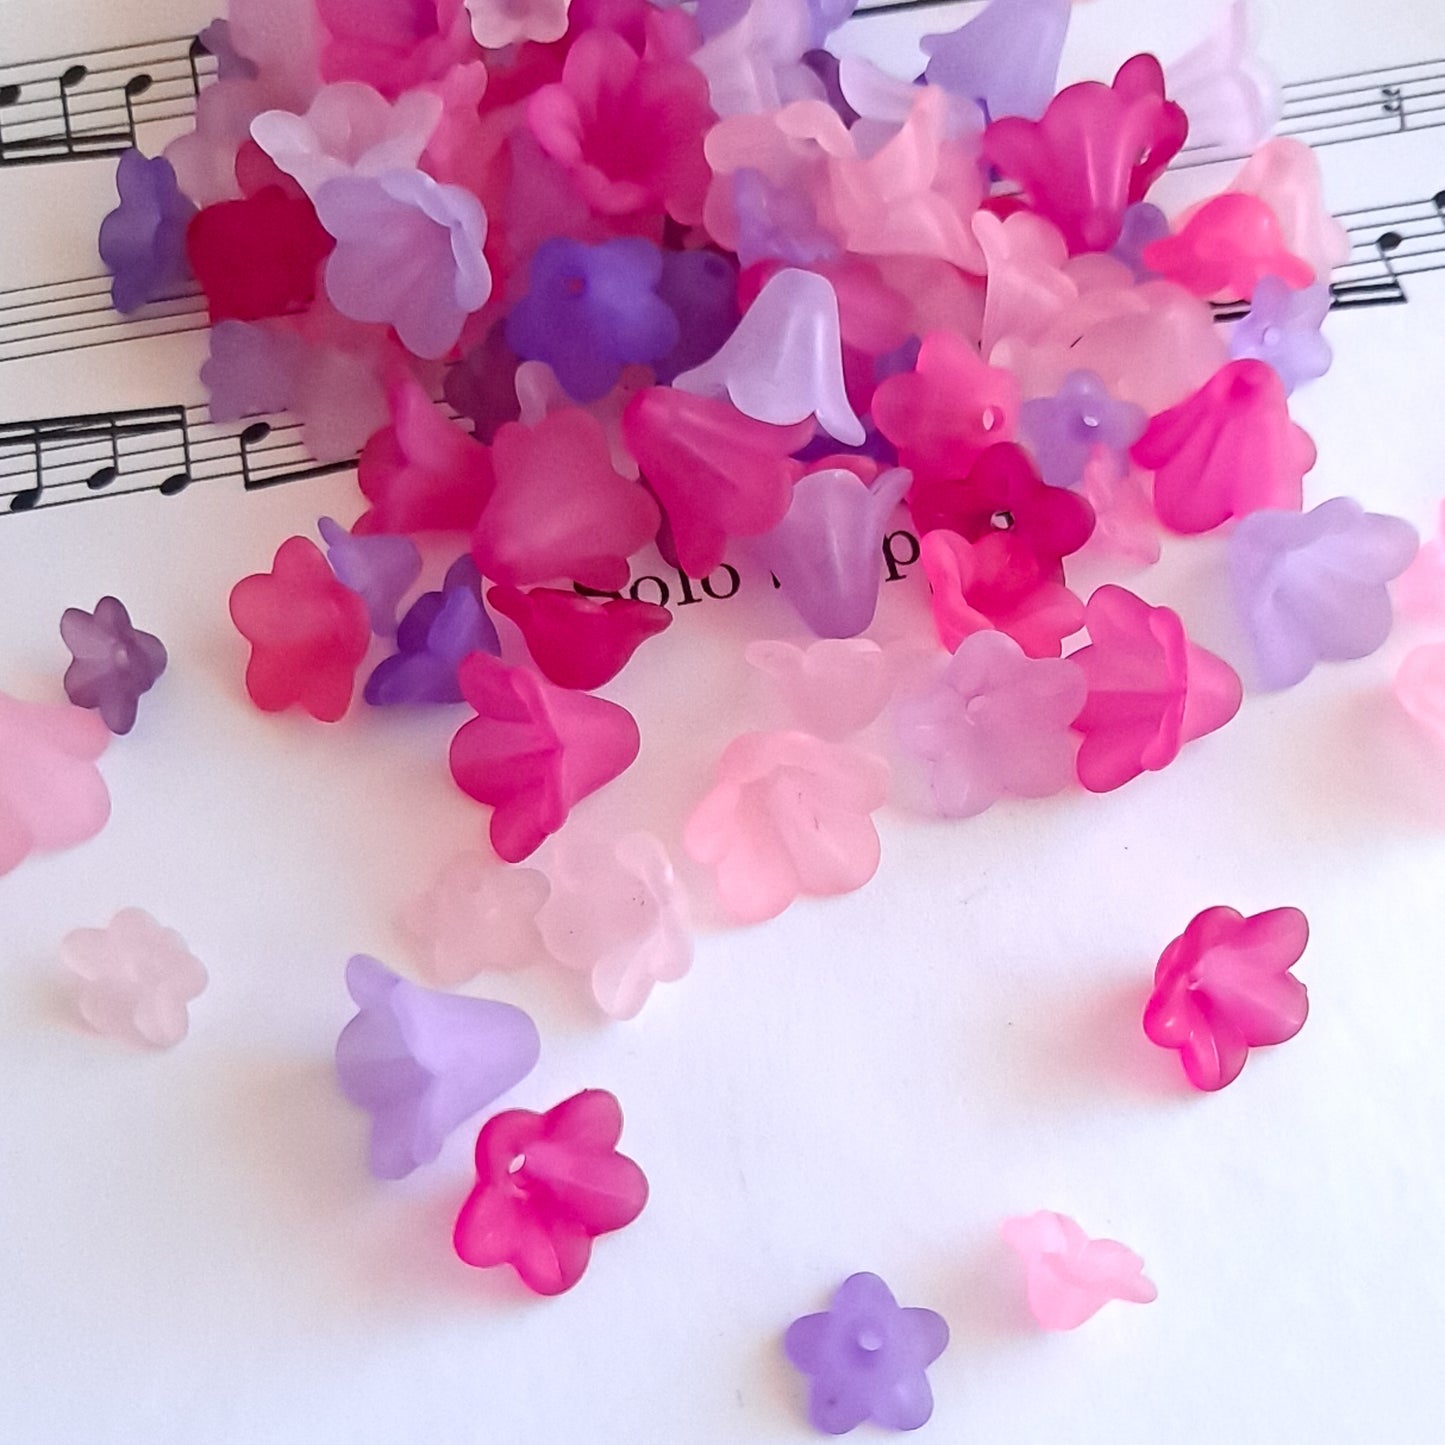 120 Pc Pink and Purple Mix of Trumpet Flower Beads, Assorted Sizes, Colors, Fuchsia, Lavender, Lilac Set, Nesting Beads for DIY Craft Projects